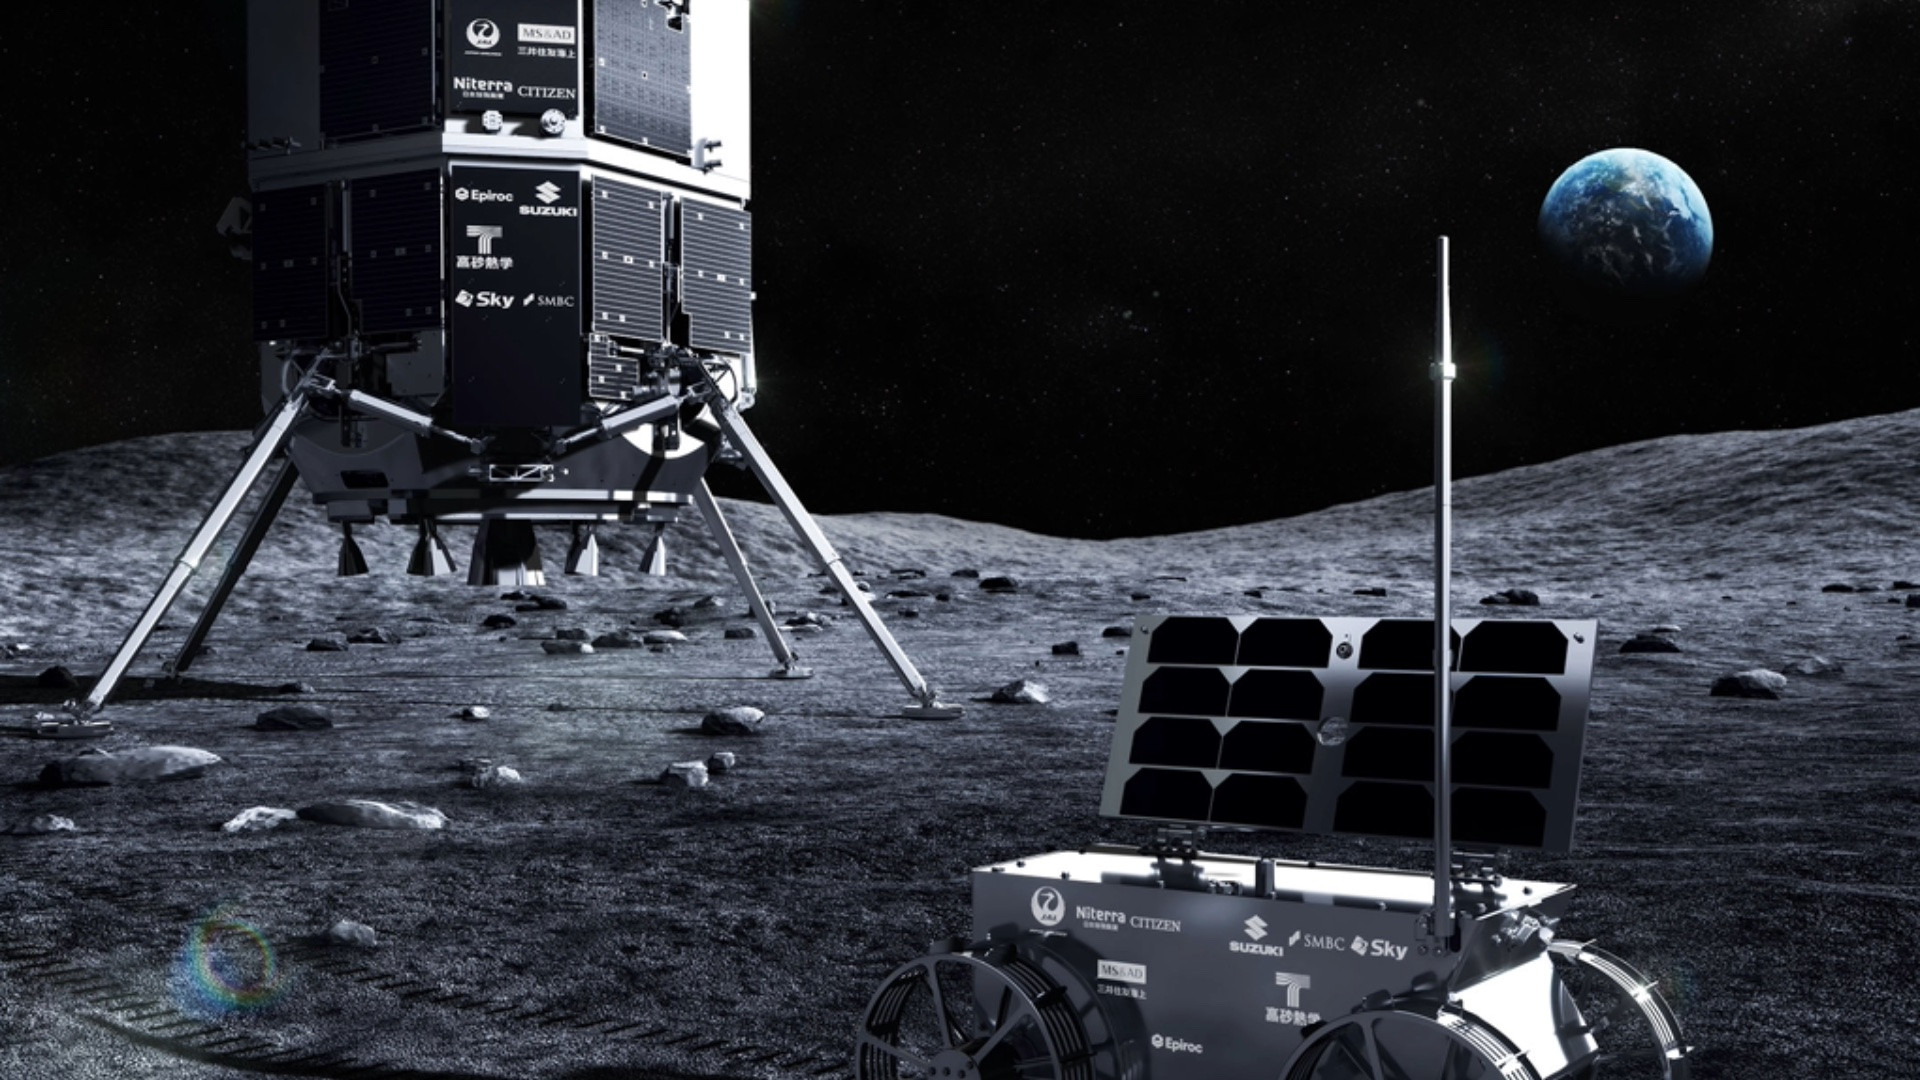 Japan’s ispace aims for moon landing in 2024 with upgraded lander